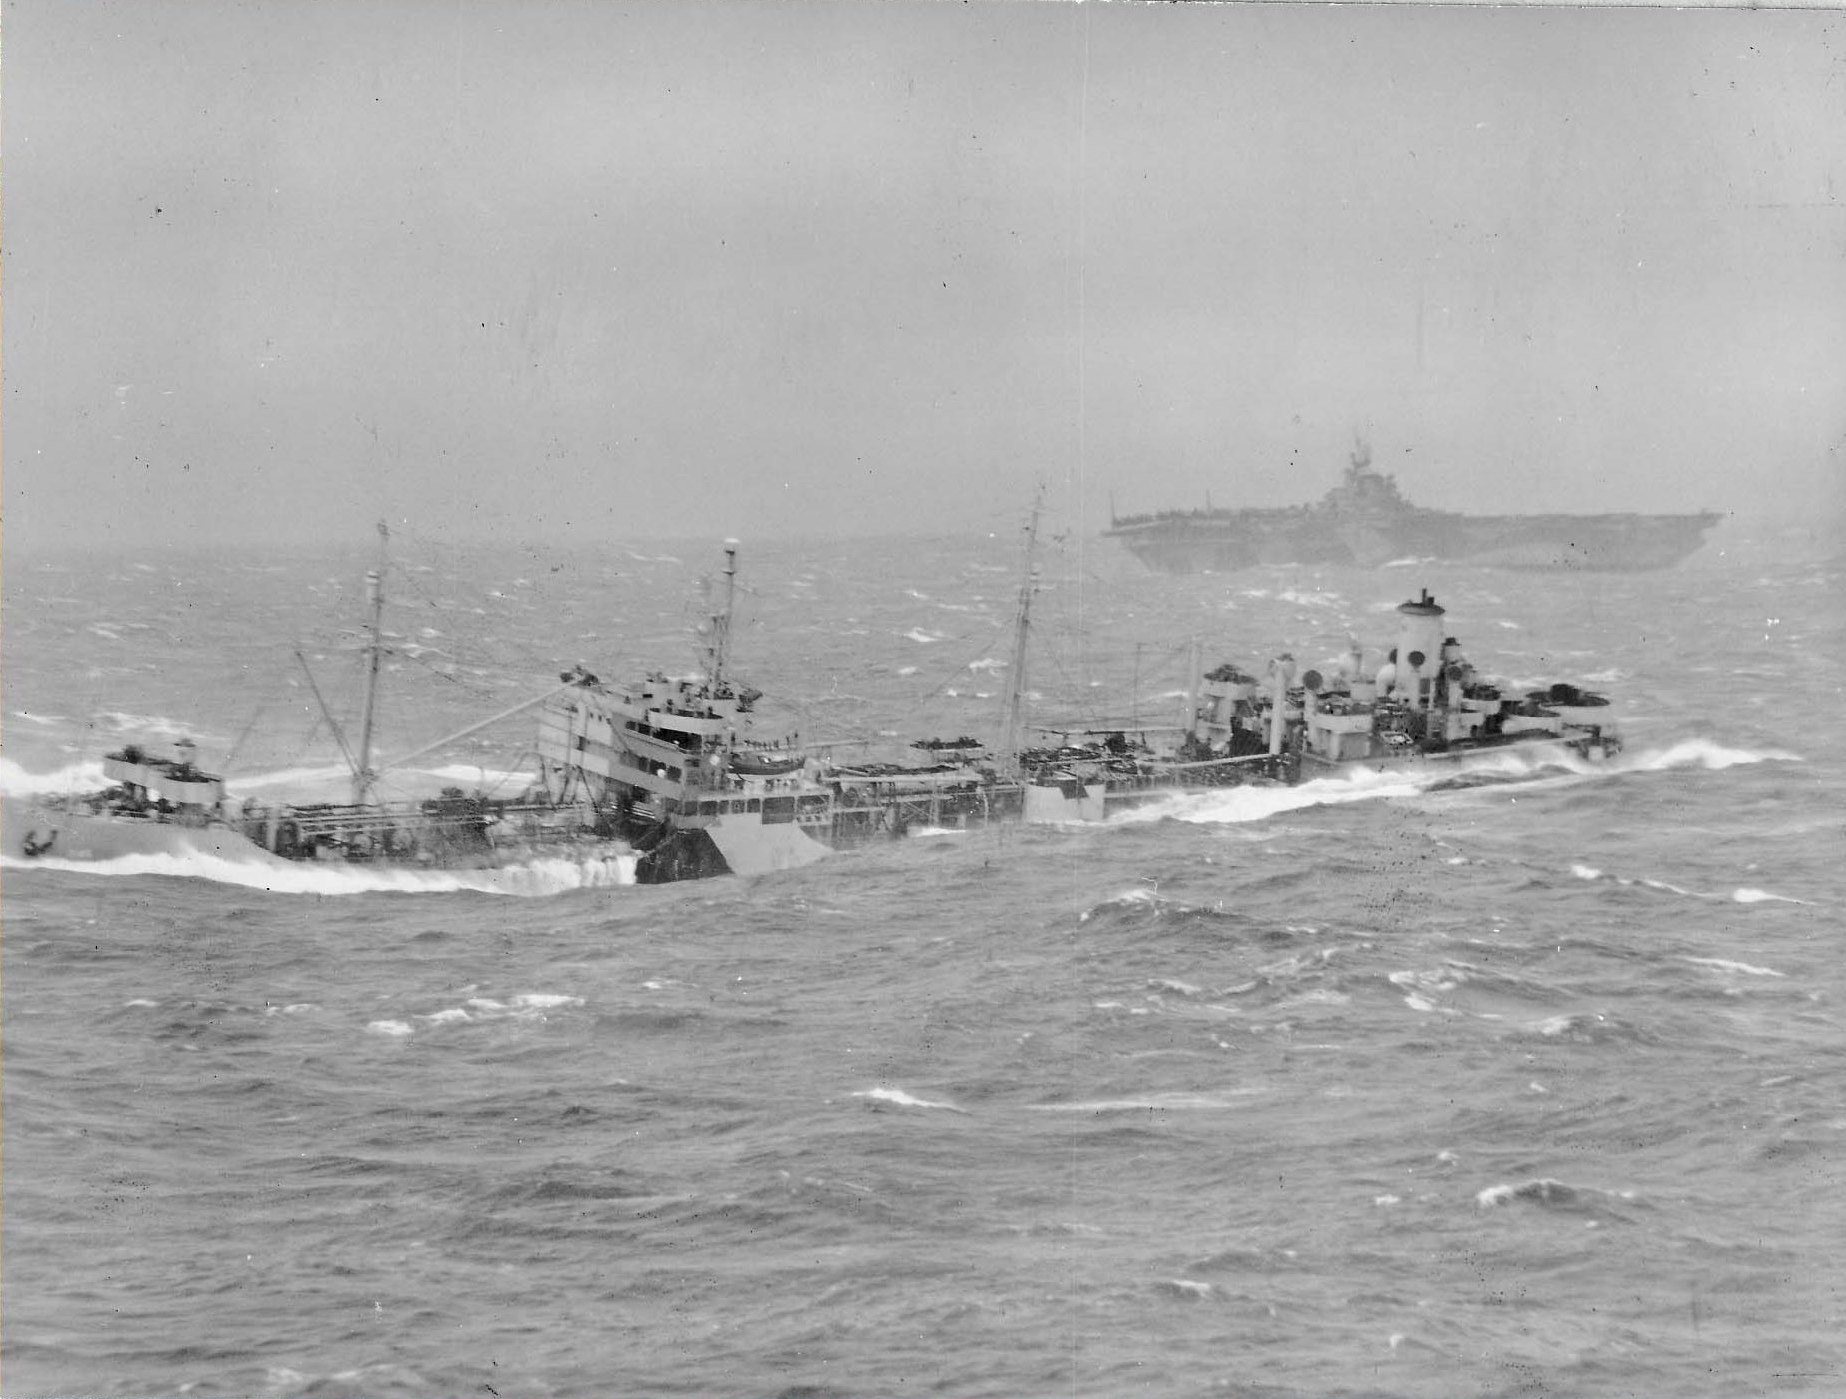 Photo from USS Essex showing Fleet Oiler USS Aucilla riding the rough seas that made refueling operations impossible, 13 Jan 1945. USS Ticonderoga is seen beyond.